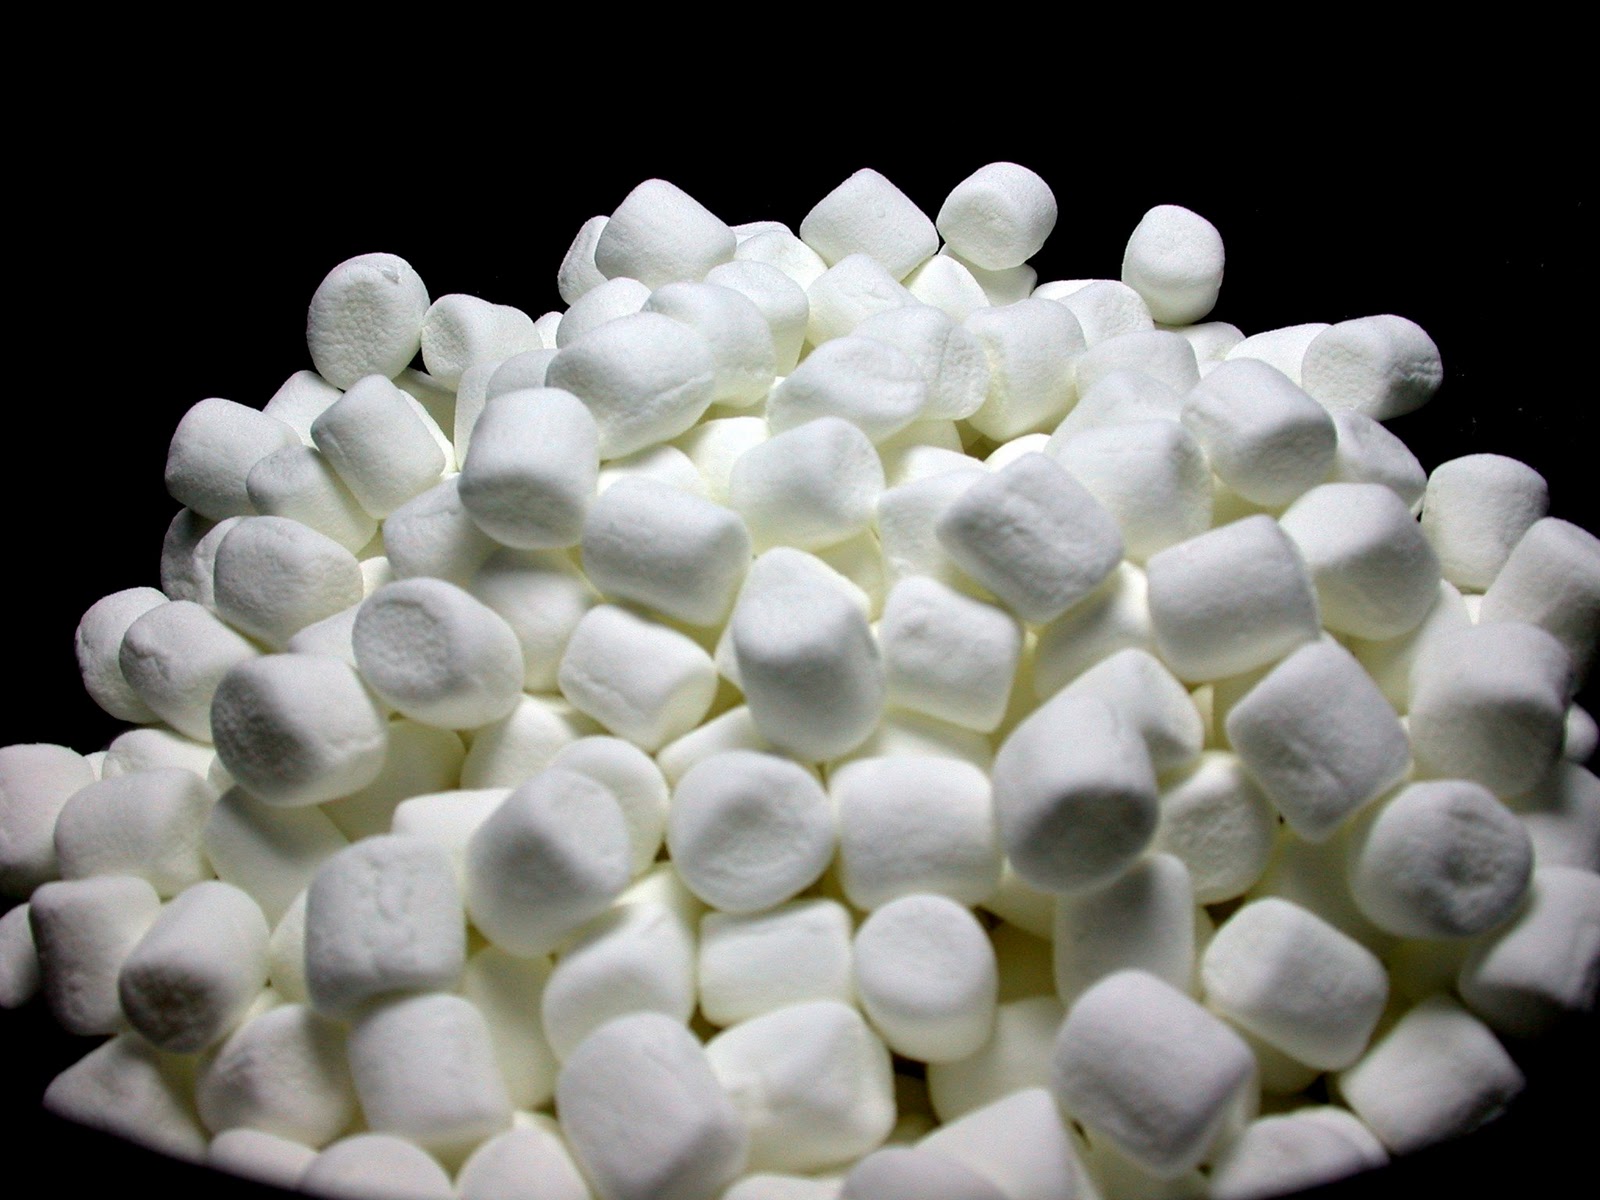 The Little Farm That Could: Mini Marshmallows are the Bees Knees